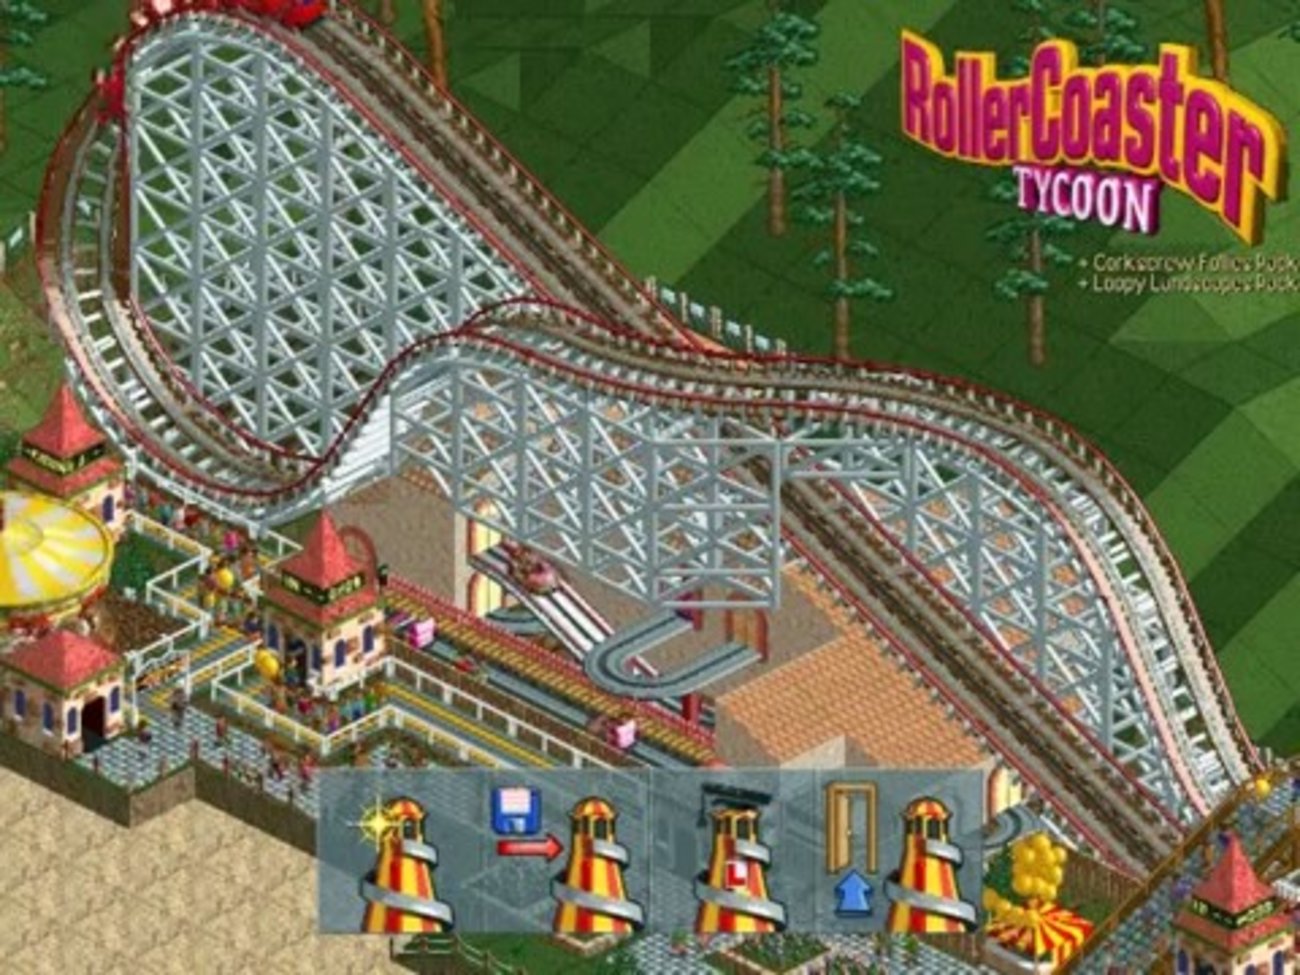 RollerCoaster Tycoon Intro